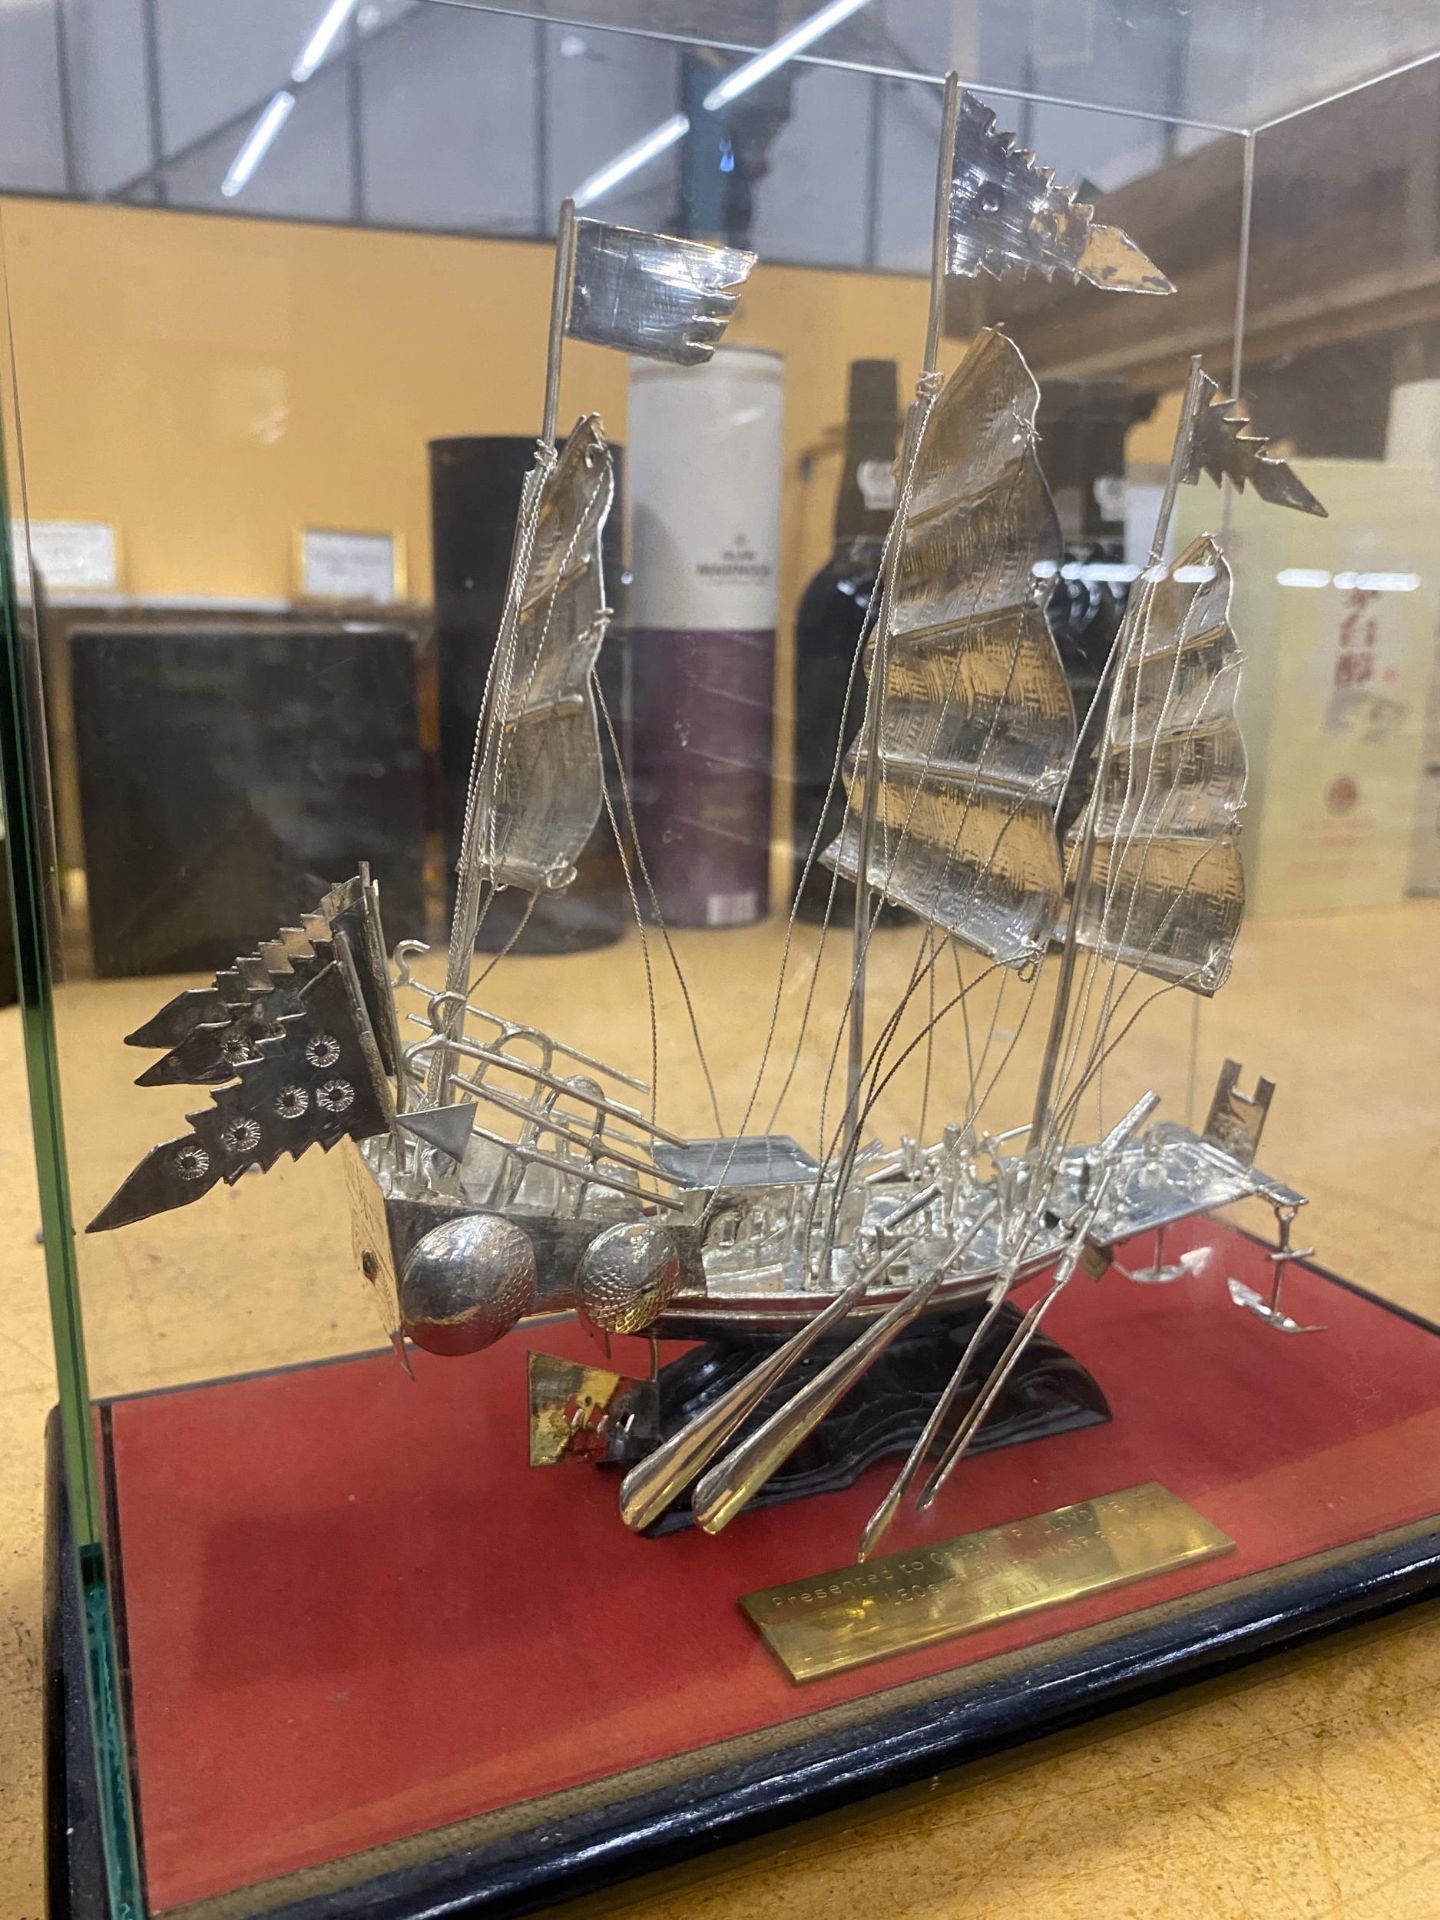 A PRESENTATION SILVER EFFECT WHITE METAL MODEL OF A BOAT IN A GLASS DISPLAY CASE - Image 2 of 3